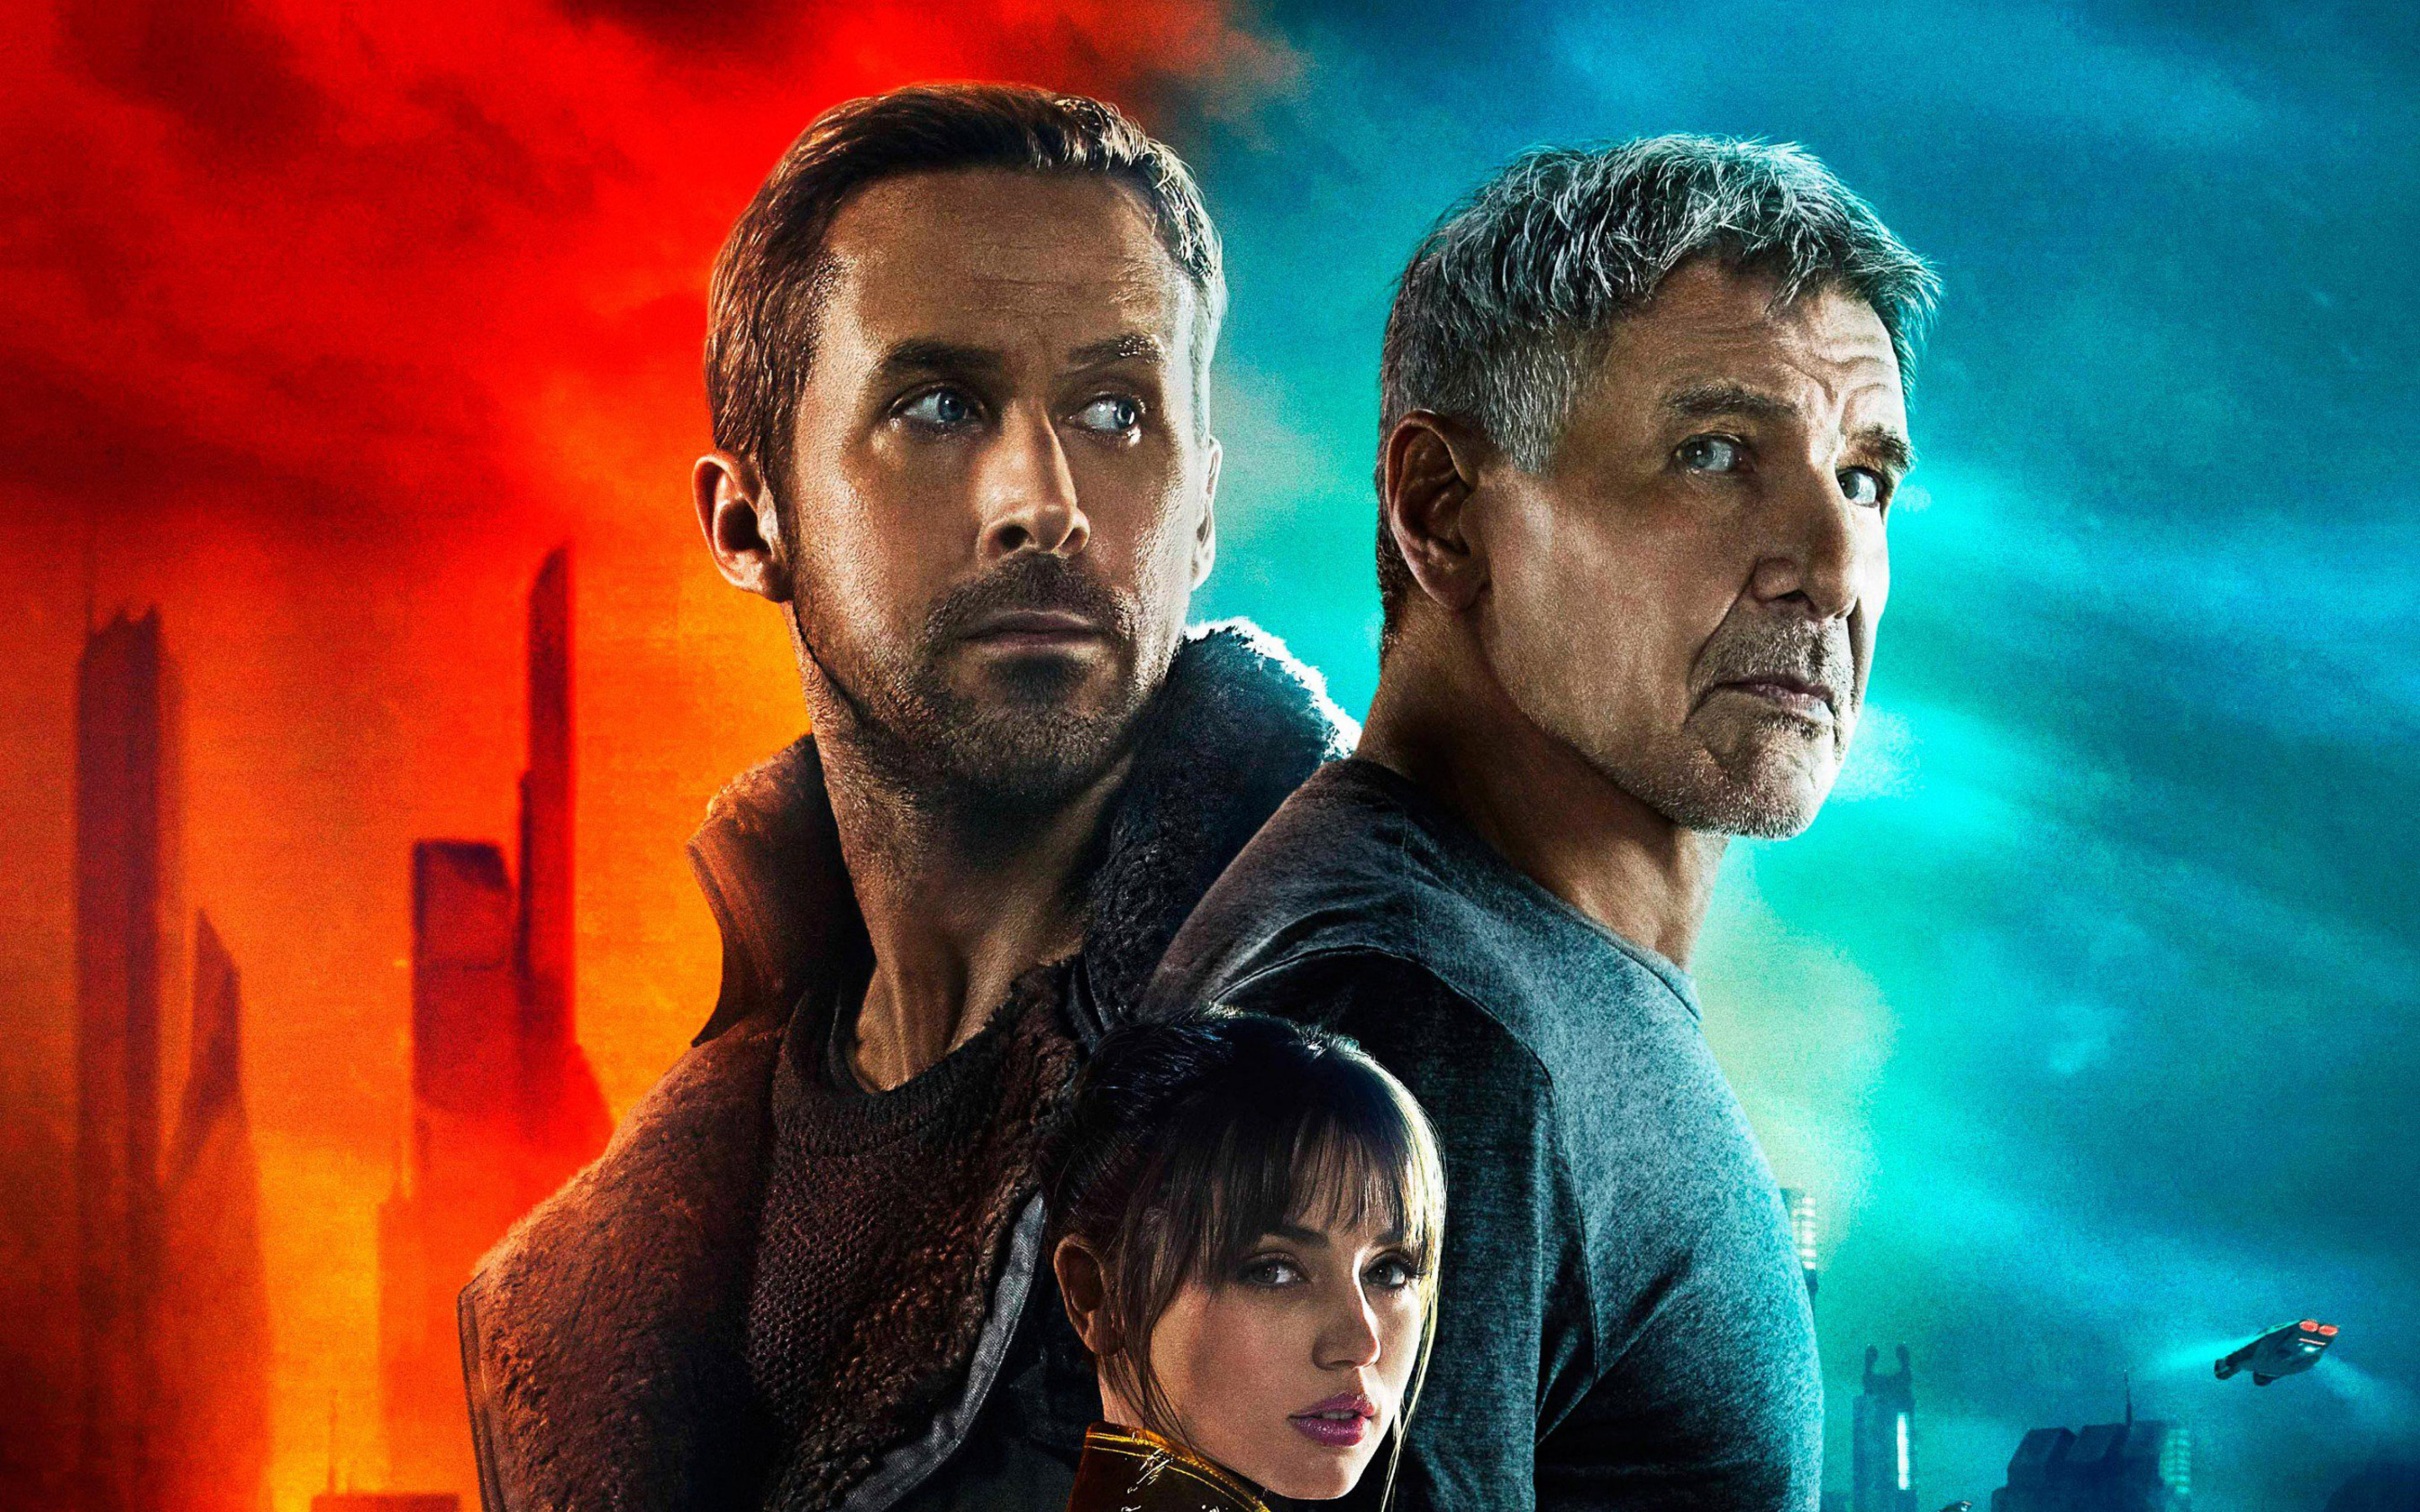 Download wallpaper Blade Runner poster, 2017 movie, thriller, Harrison Ford, Ryan Gosling, Ana de Armas for desktop with resolution 2880x1800. High Quality HD picture wallpaper